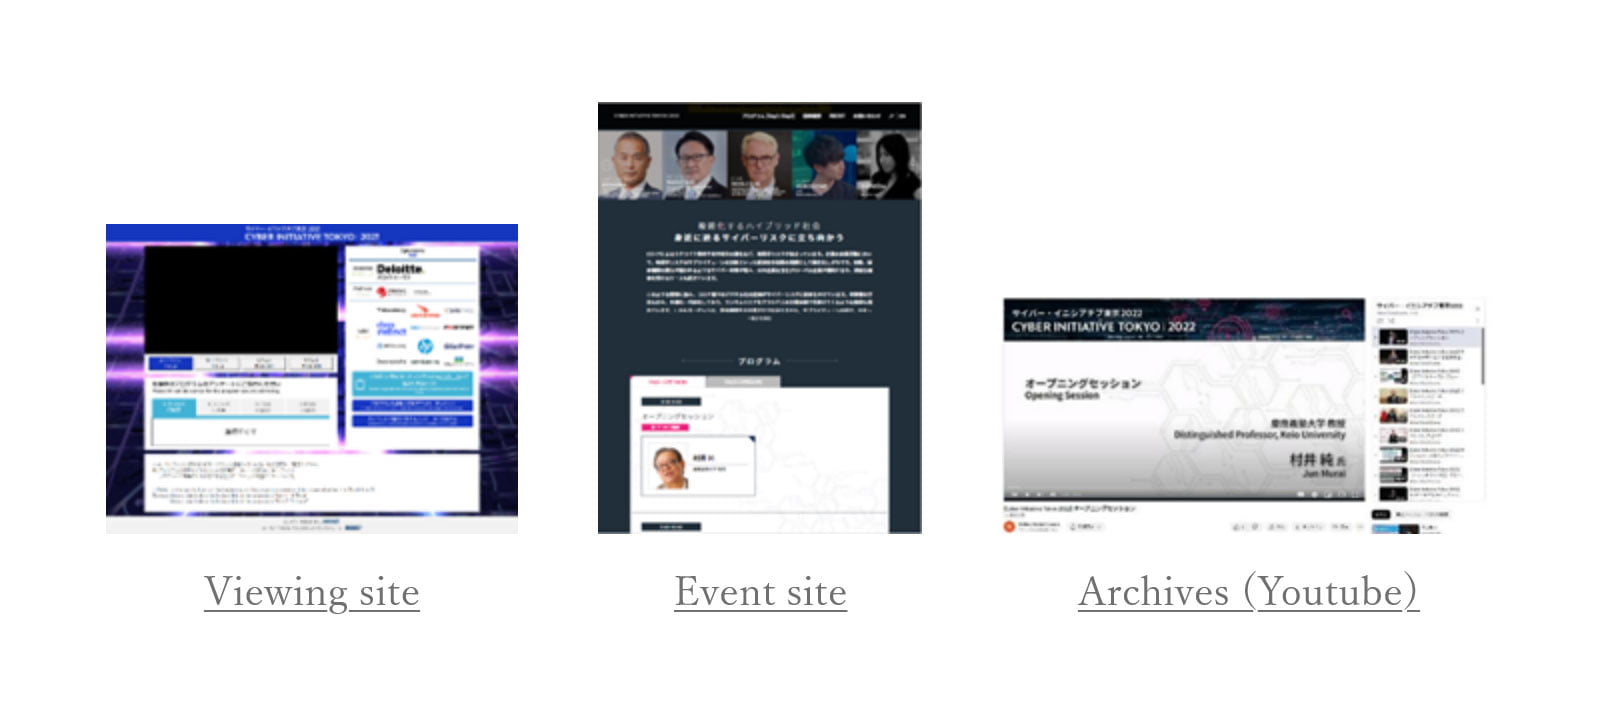  (Ref.)Cyber Initiative Tokyo 2022 Websites:Viewing site,Event site and youtube